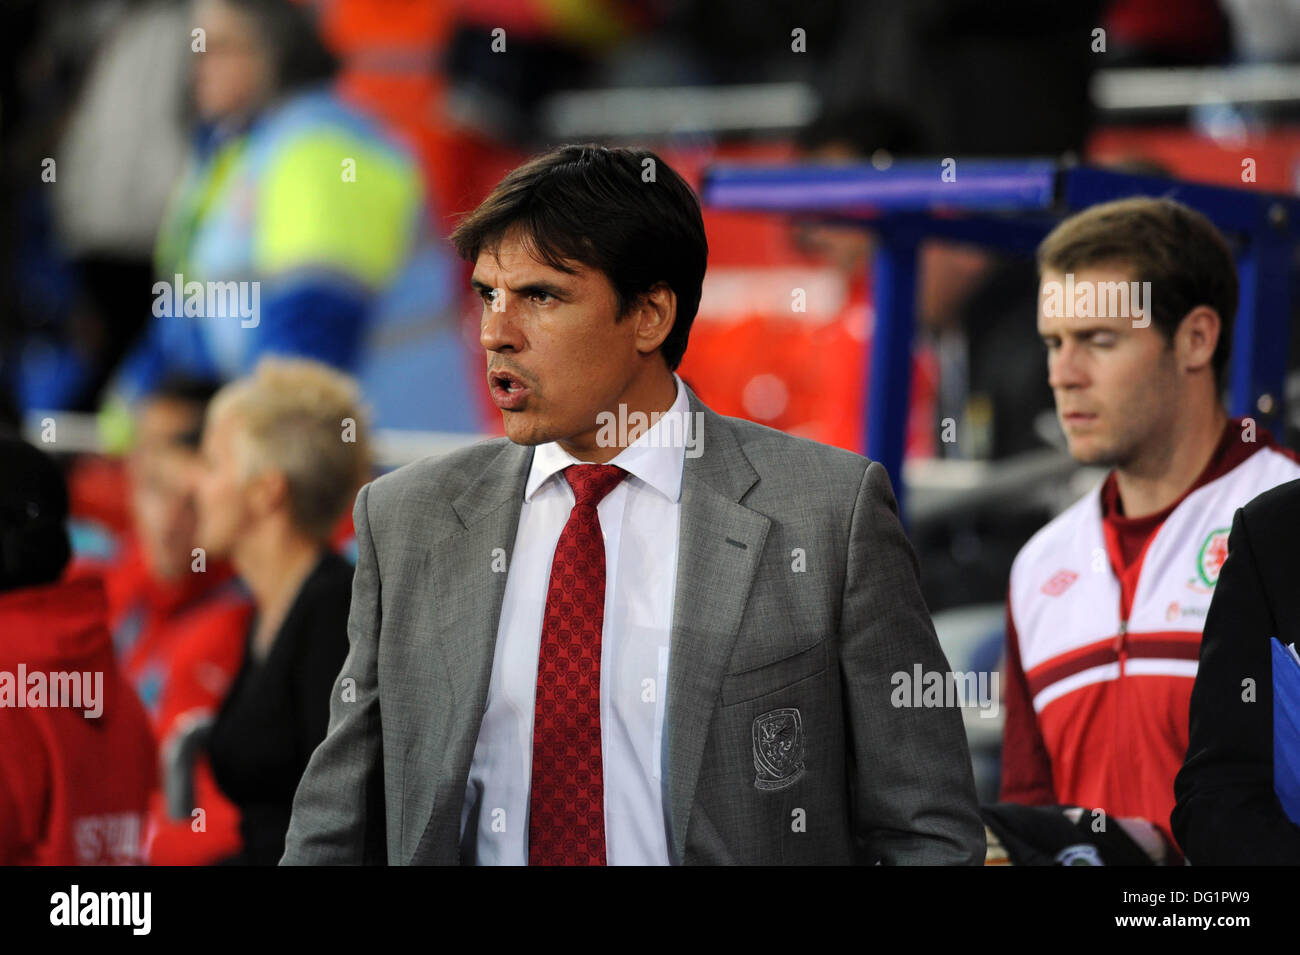 Cardiff, Wales, UK. 11th Oct, 2013. FIFA 2014 World Cup Qualifying Match - Wales v Macedonia at the Cardiff City Stadium : Wales Manager Chris Coleman before kick off. Credit:  Phil Rees/Alamy Live News Stock Photo